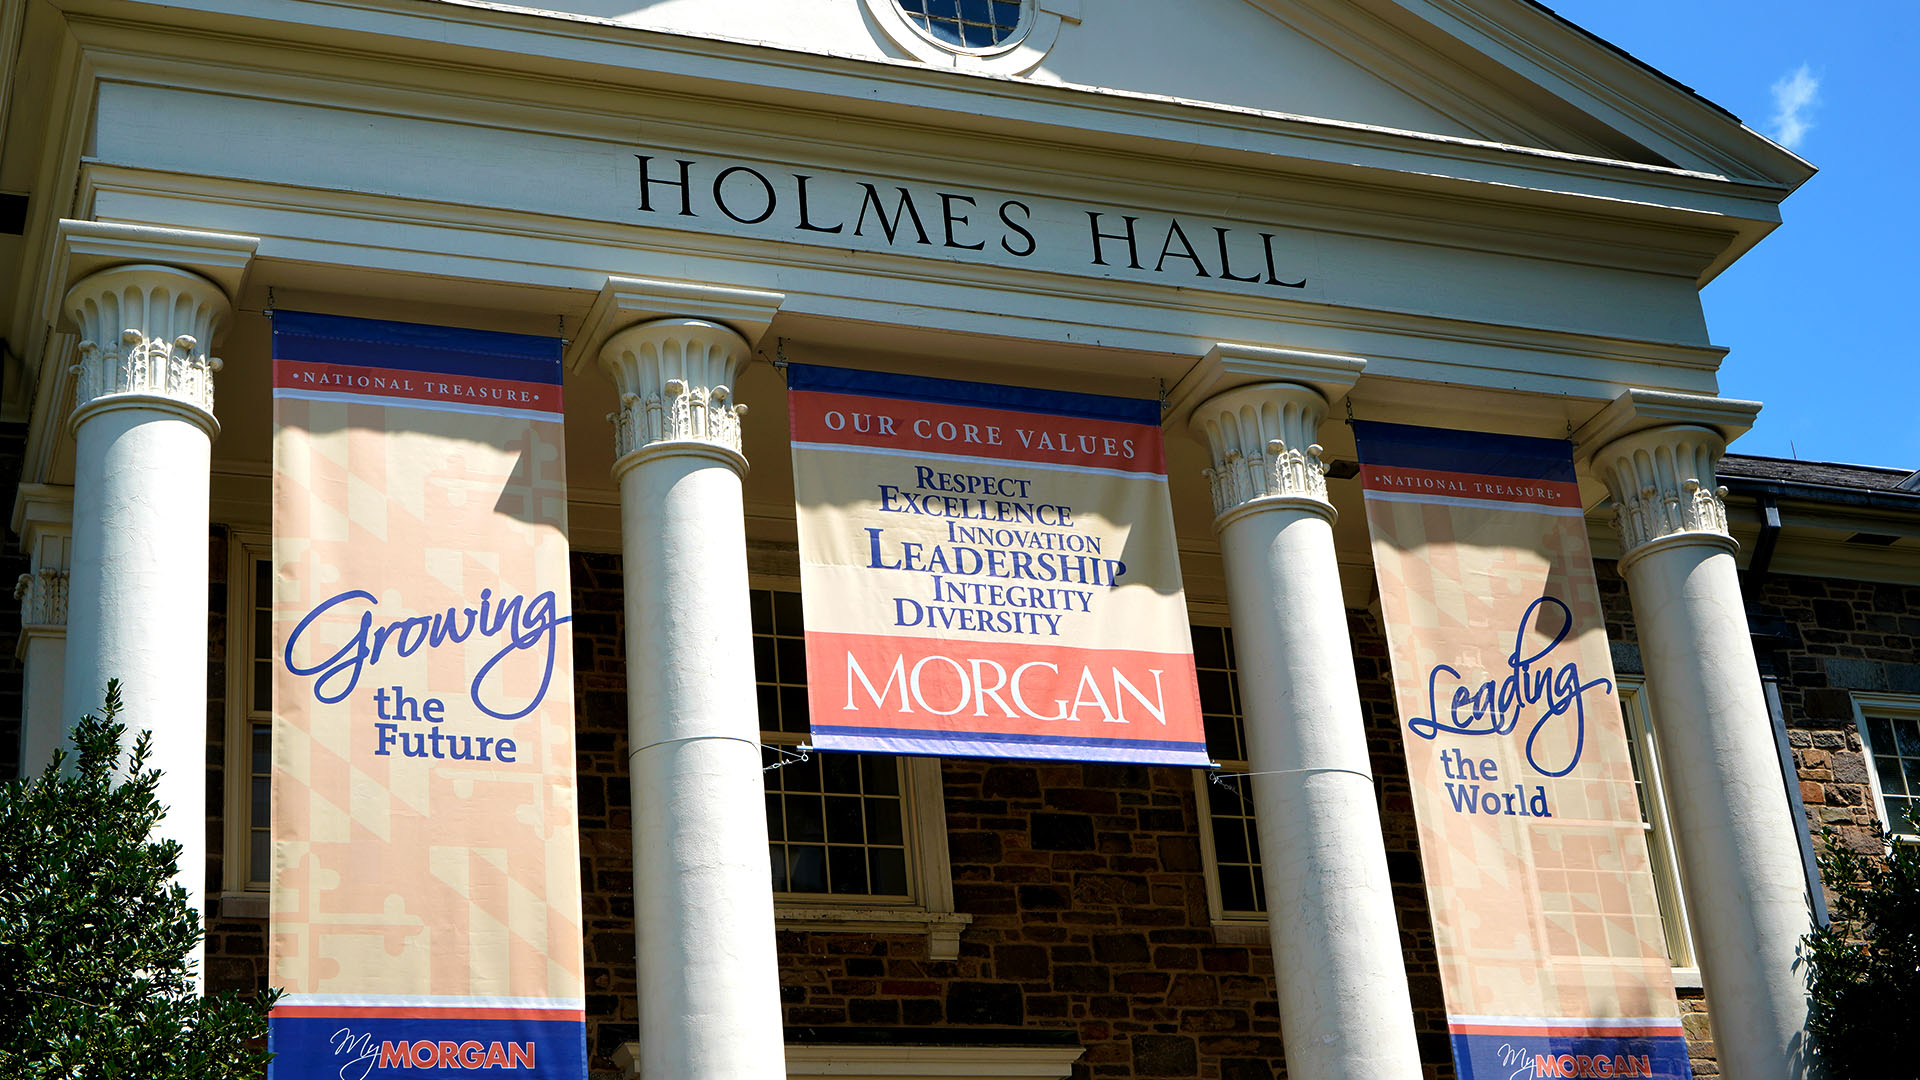 Holmes Hall with 3 hanging banners